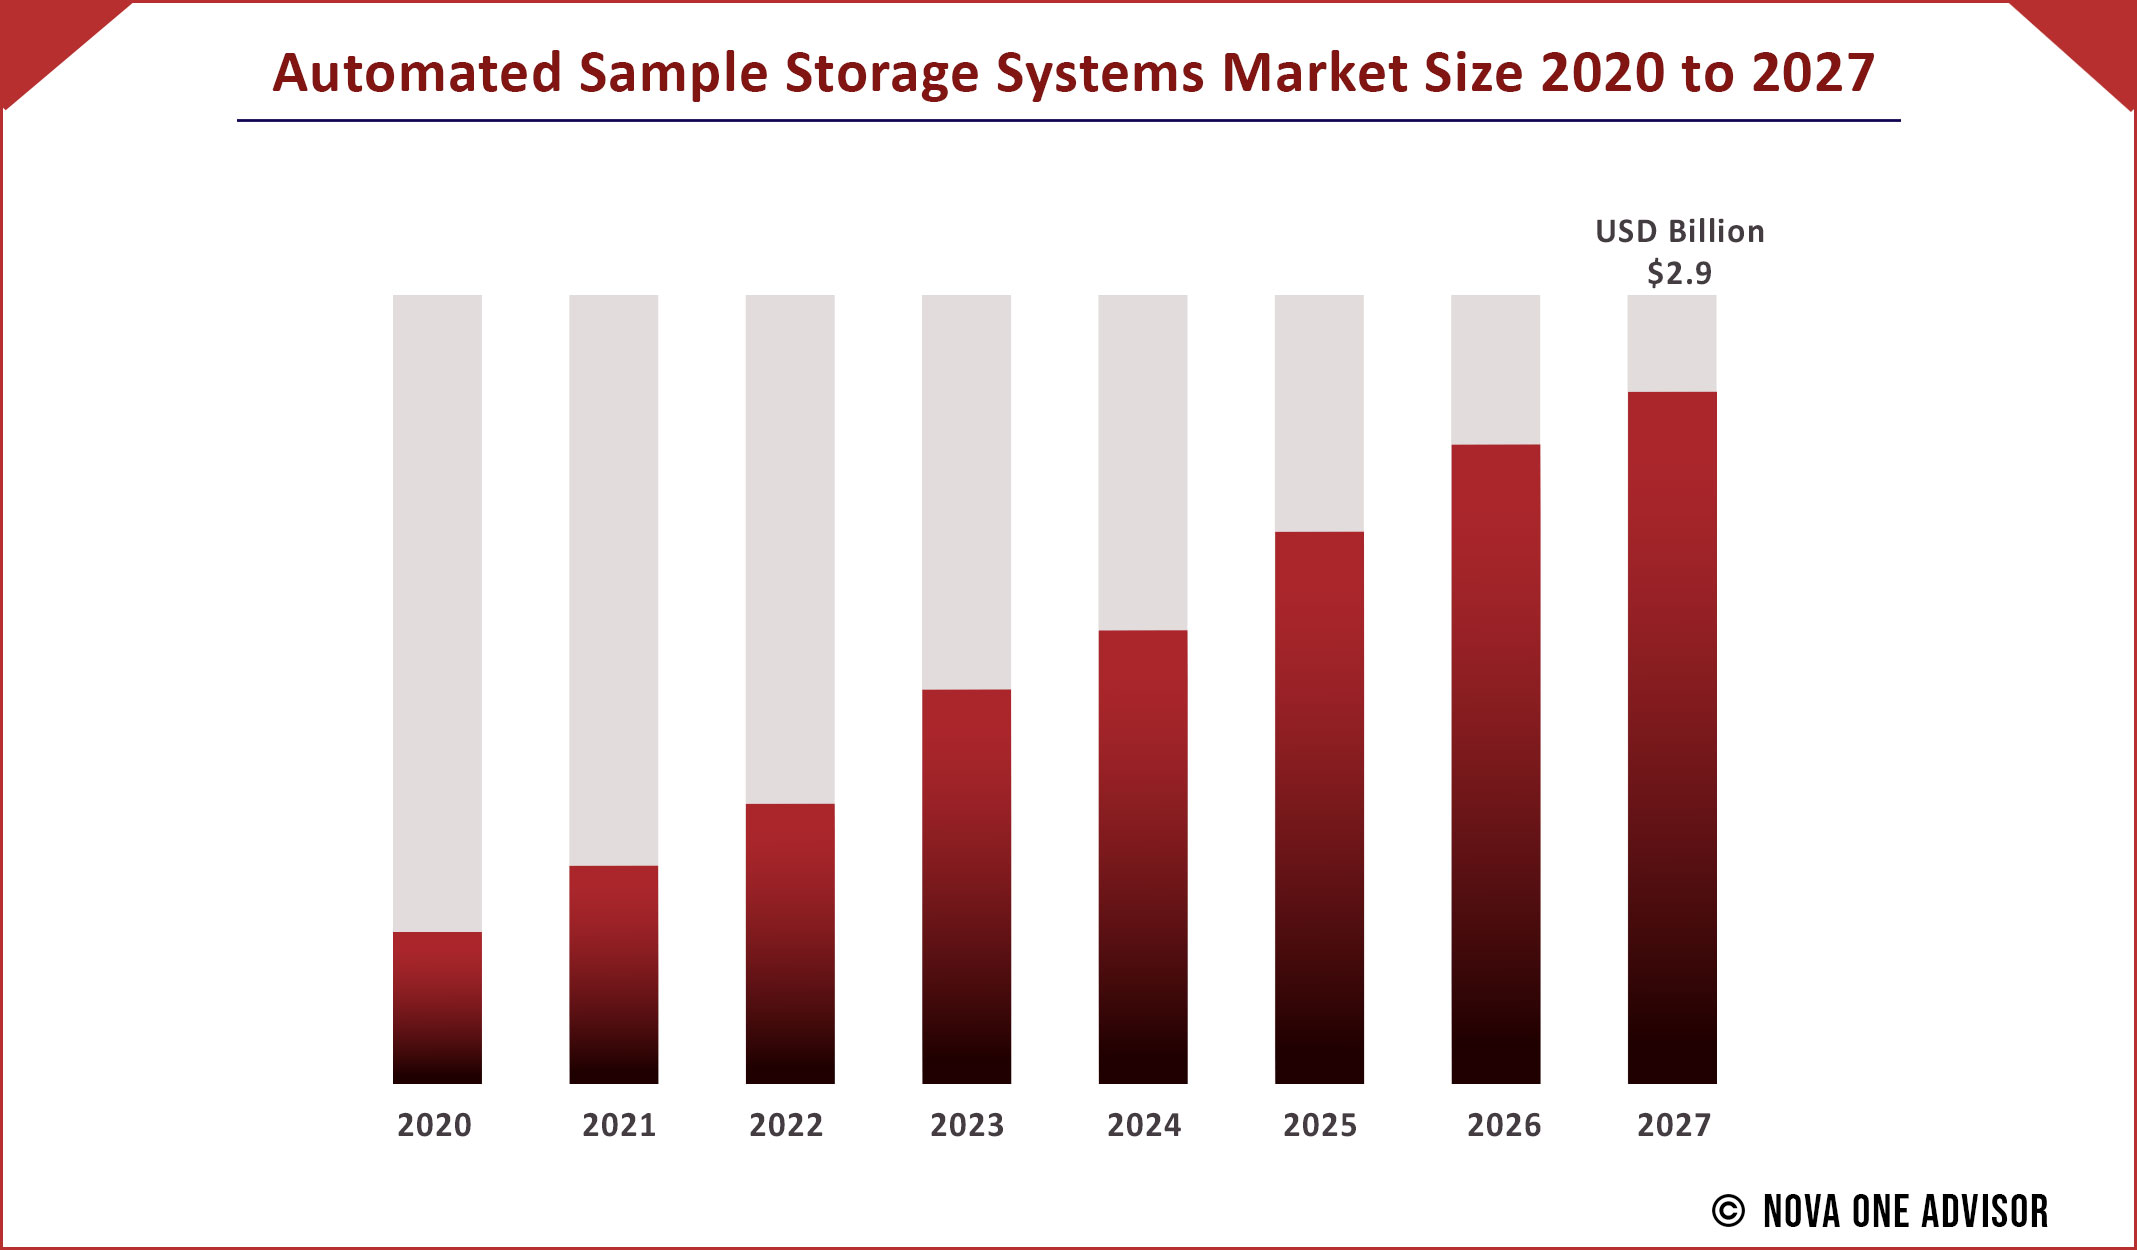 Automated Sample Storage Systems Market Size 2020 to 2027